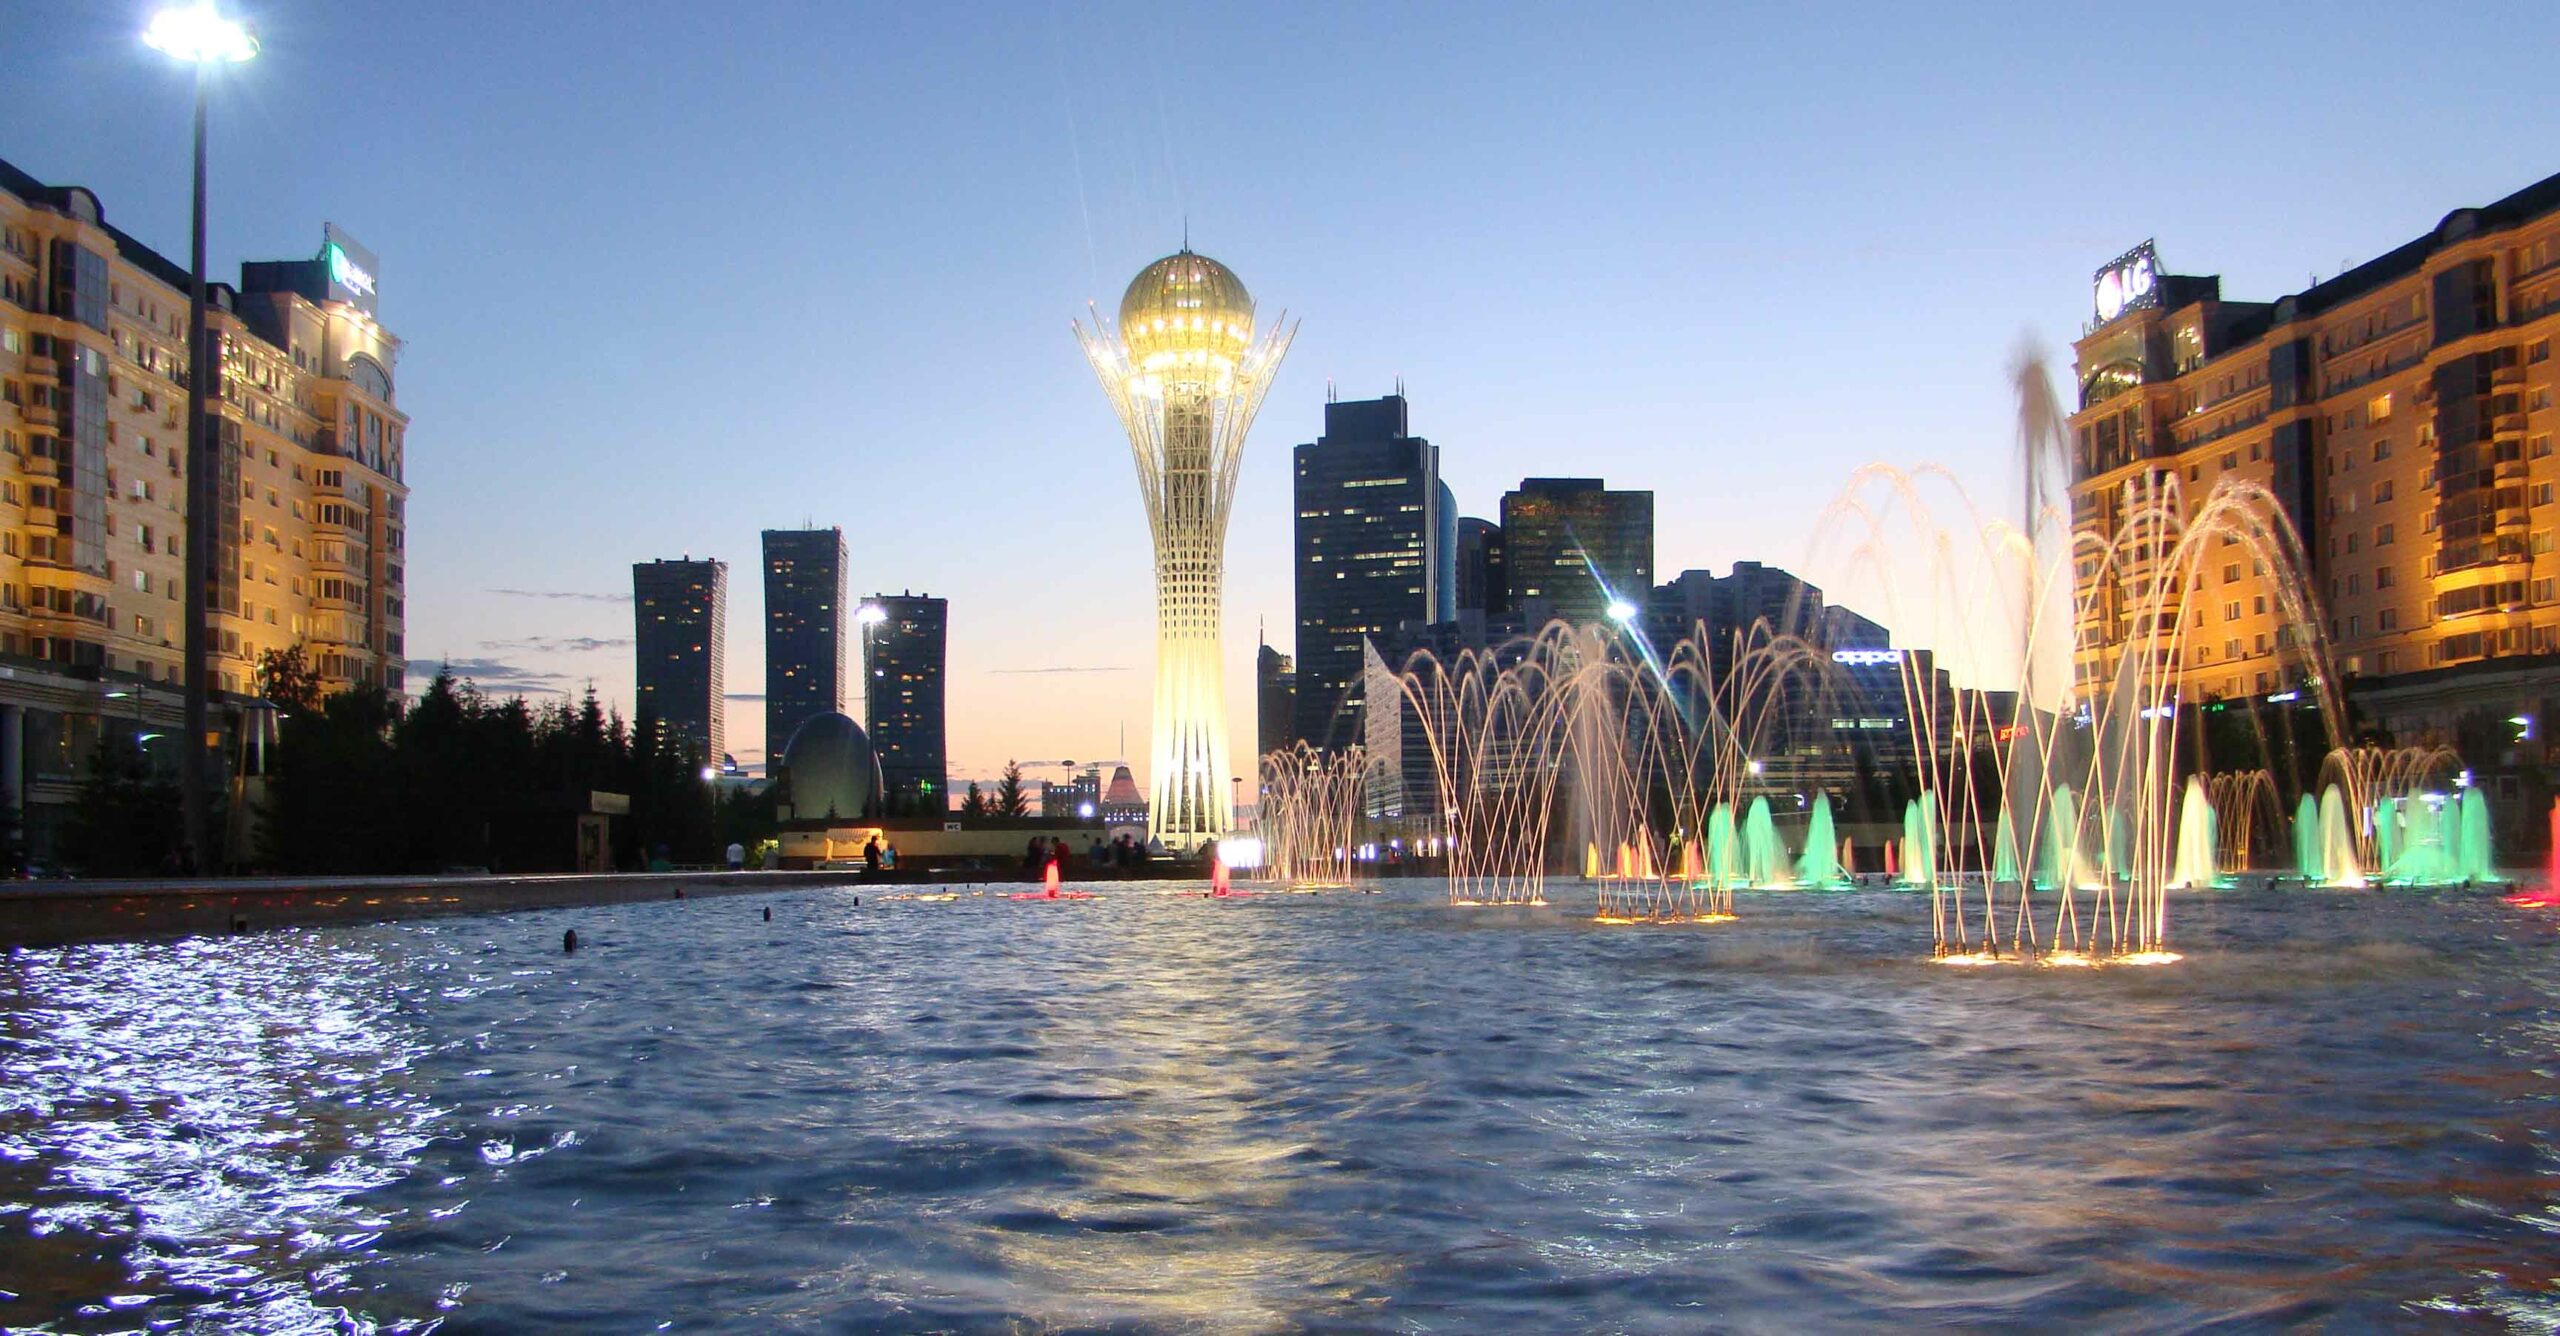 Astana in the evening